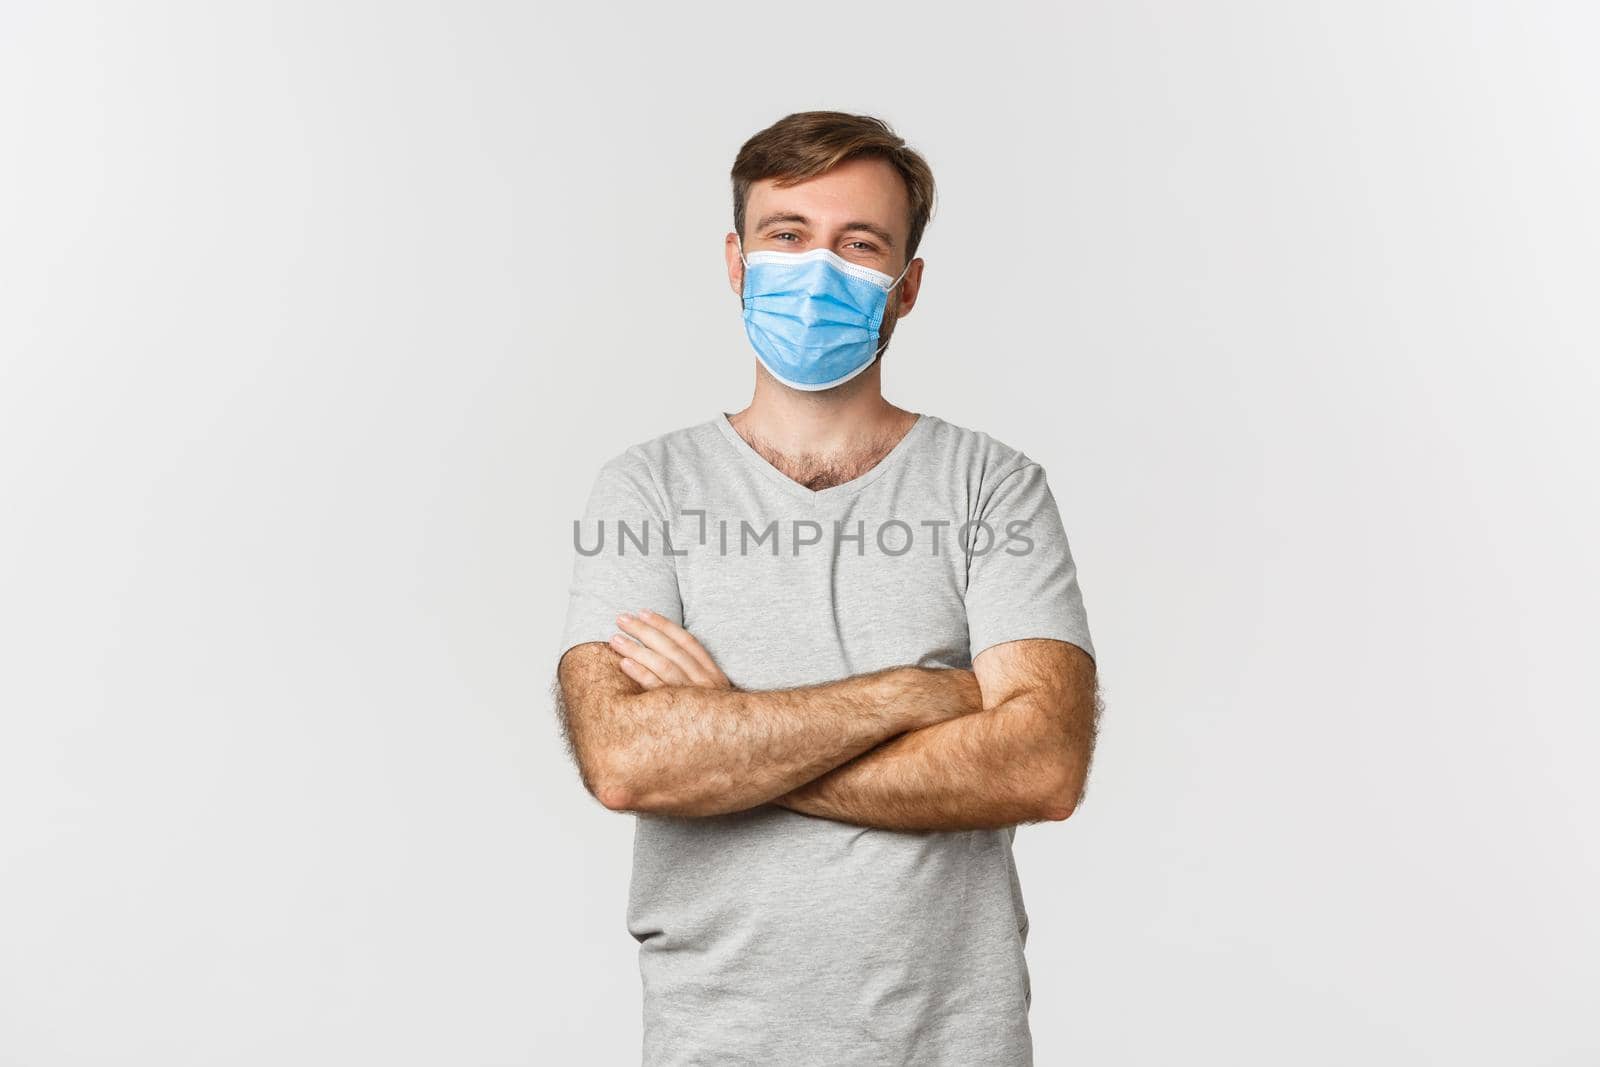 Concept of pandemic, covid-19 and social-distancing. Handsome and confident man in medical mask, cross arms on chest and smiling, standing over white background.